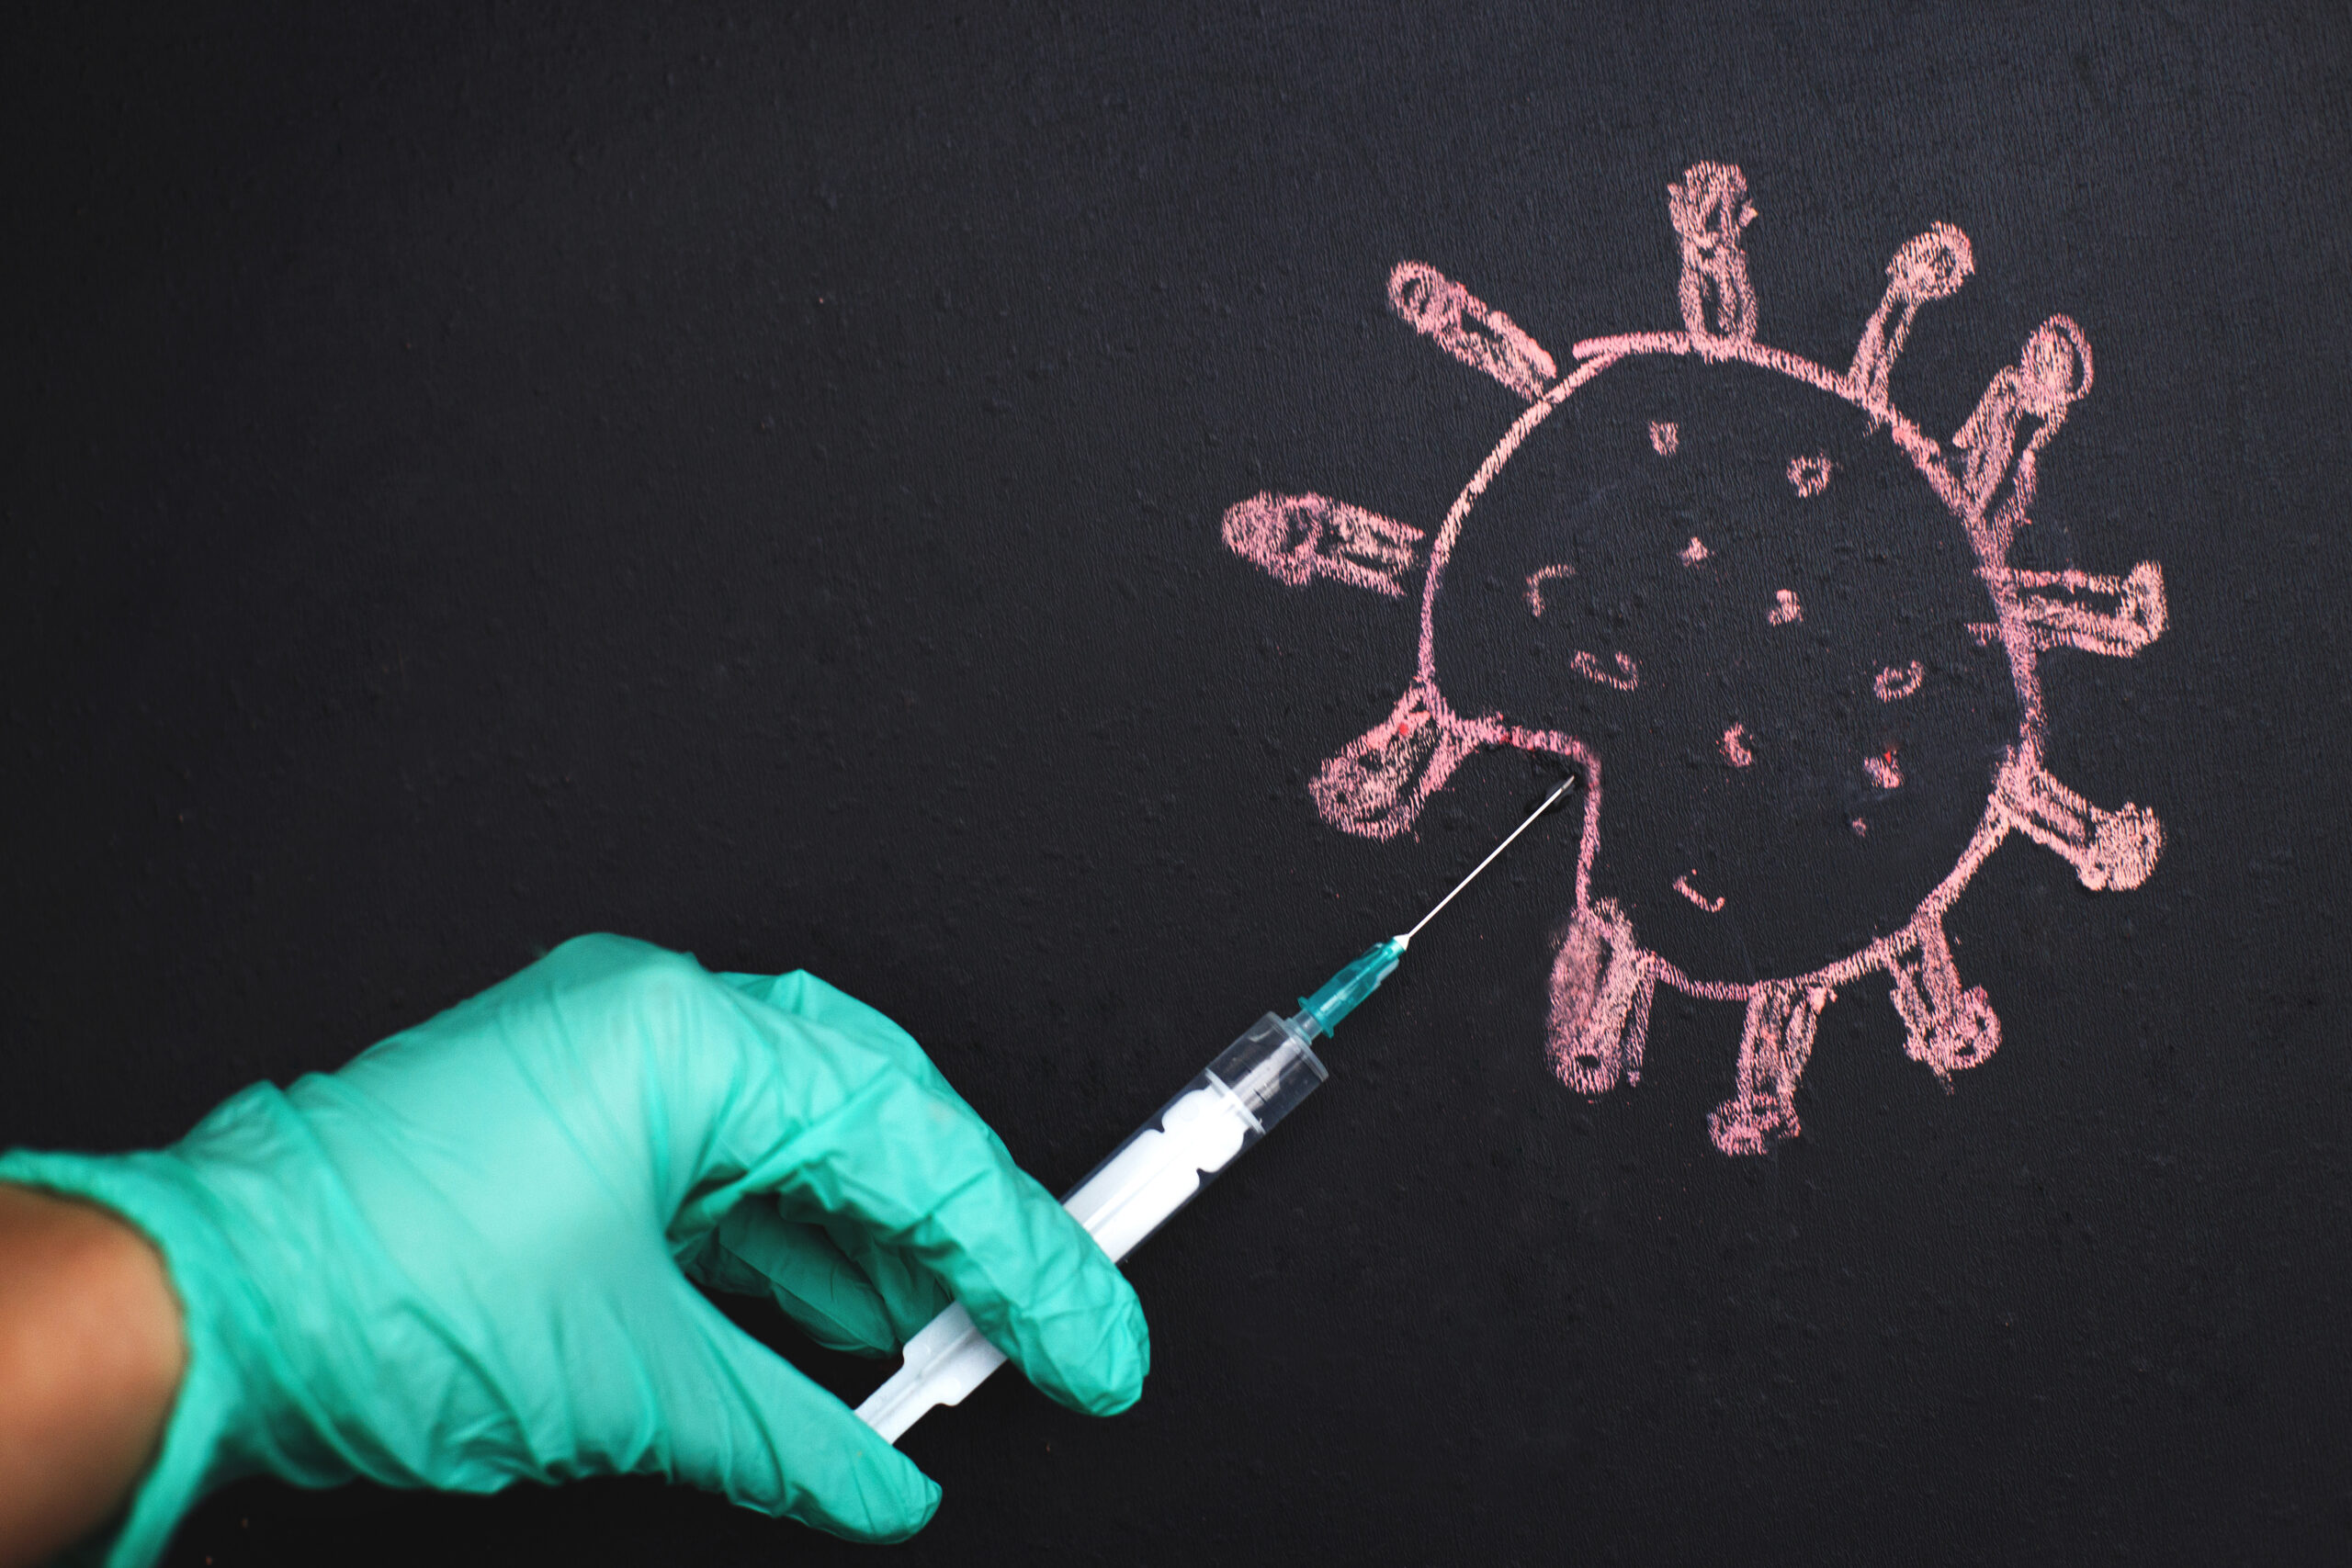 the doctor's hand makes an injection into the coronavirus molecule. The concept of defeating the virus by vaccination.